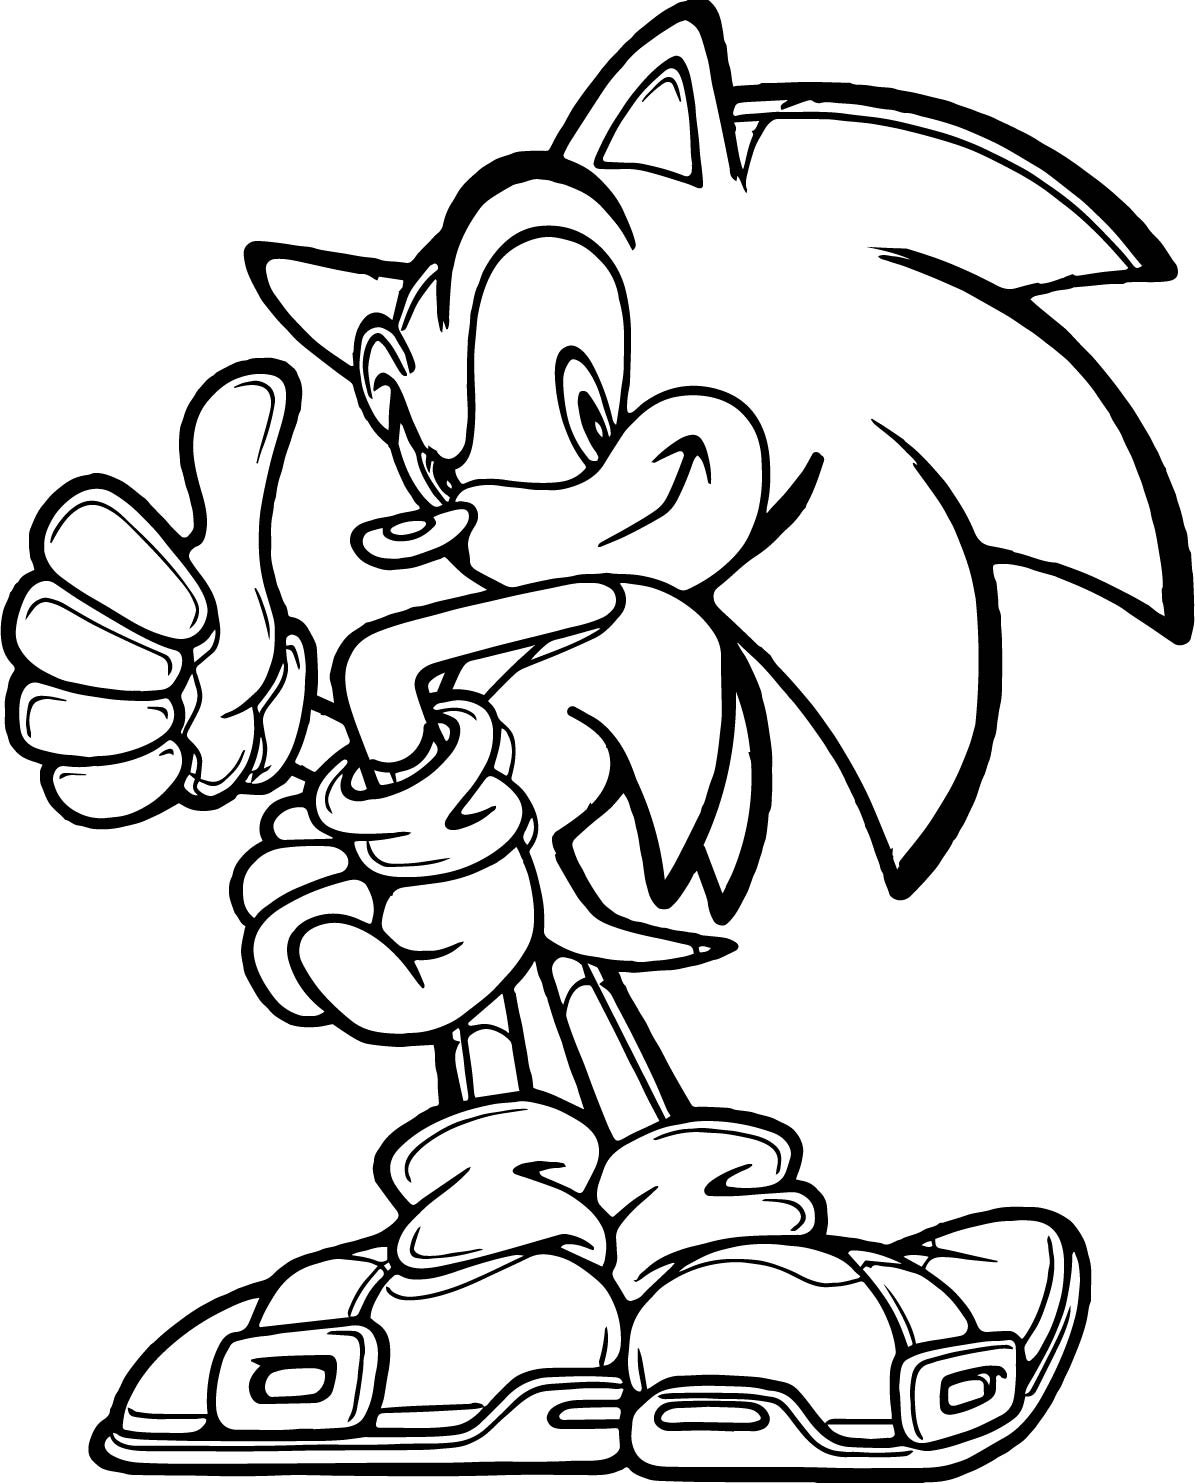 Sonic Exe Coloring Pages at GetDrawings Free download